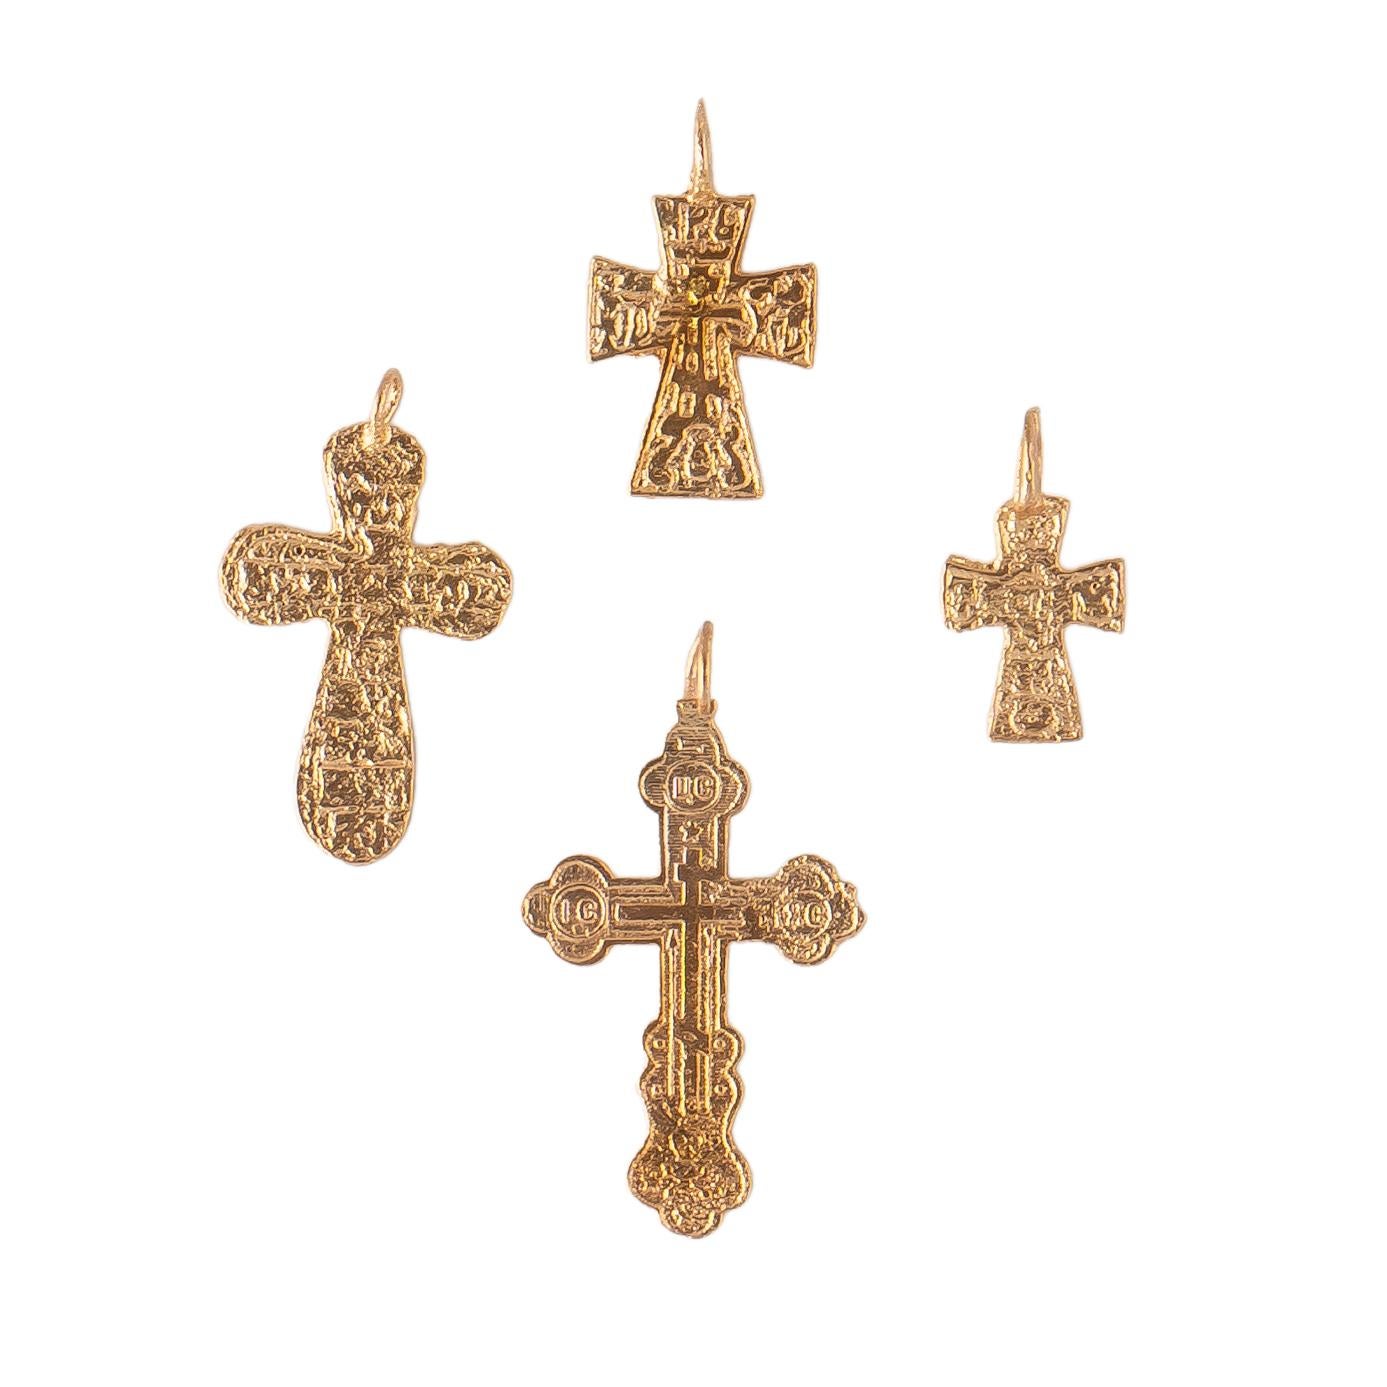 A group of rare gilded Russian Orthodox pendant crosses from the era of the Romanovs of different sizes, the two smaller ones probably meant for children, each with varying stamped religious motifs including crosses. Gilded in rose gold on